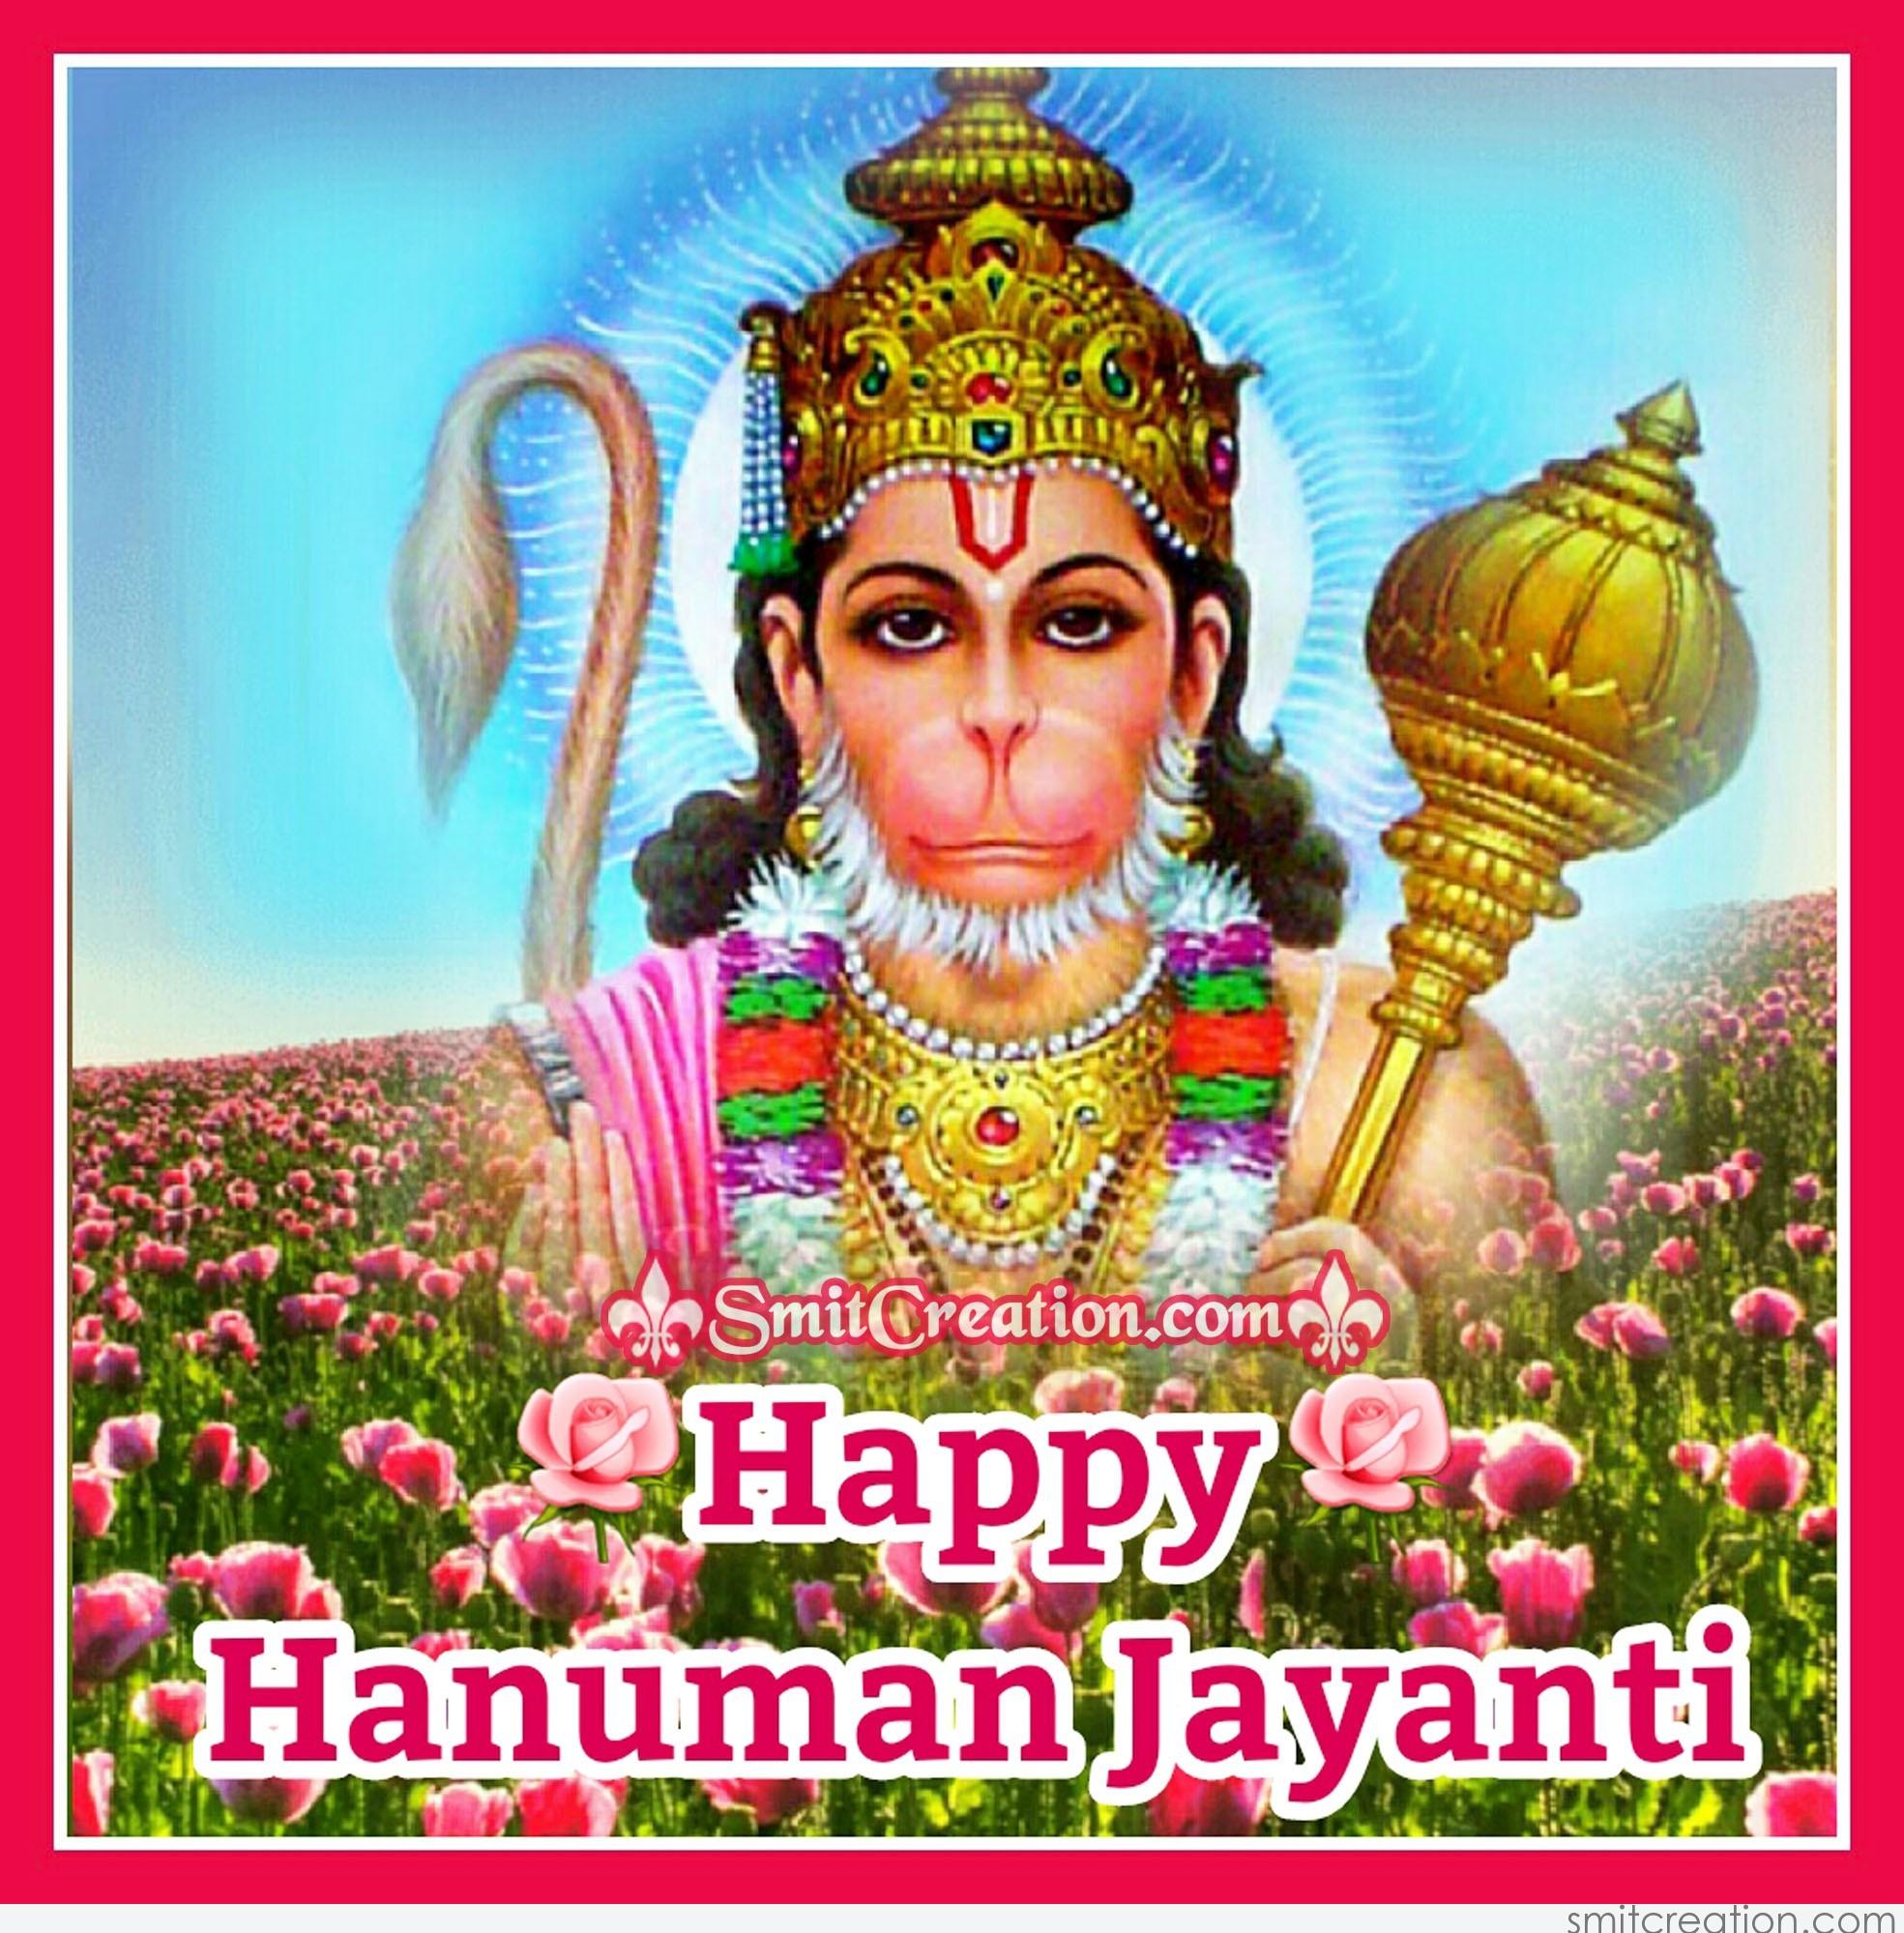 Hanuman Jayanti Wishes, Blessings, Messages Images